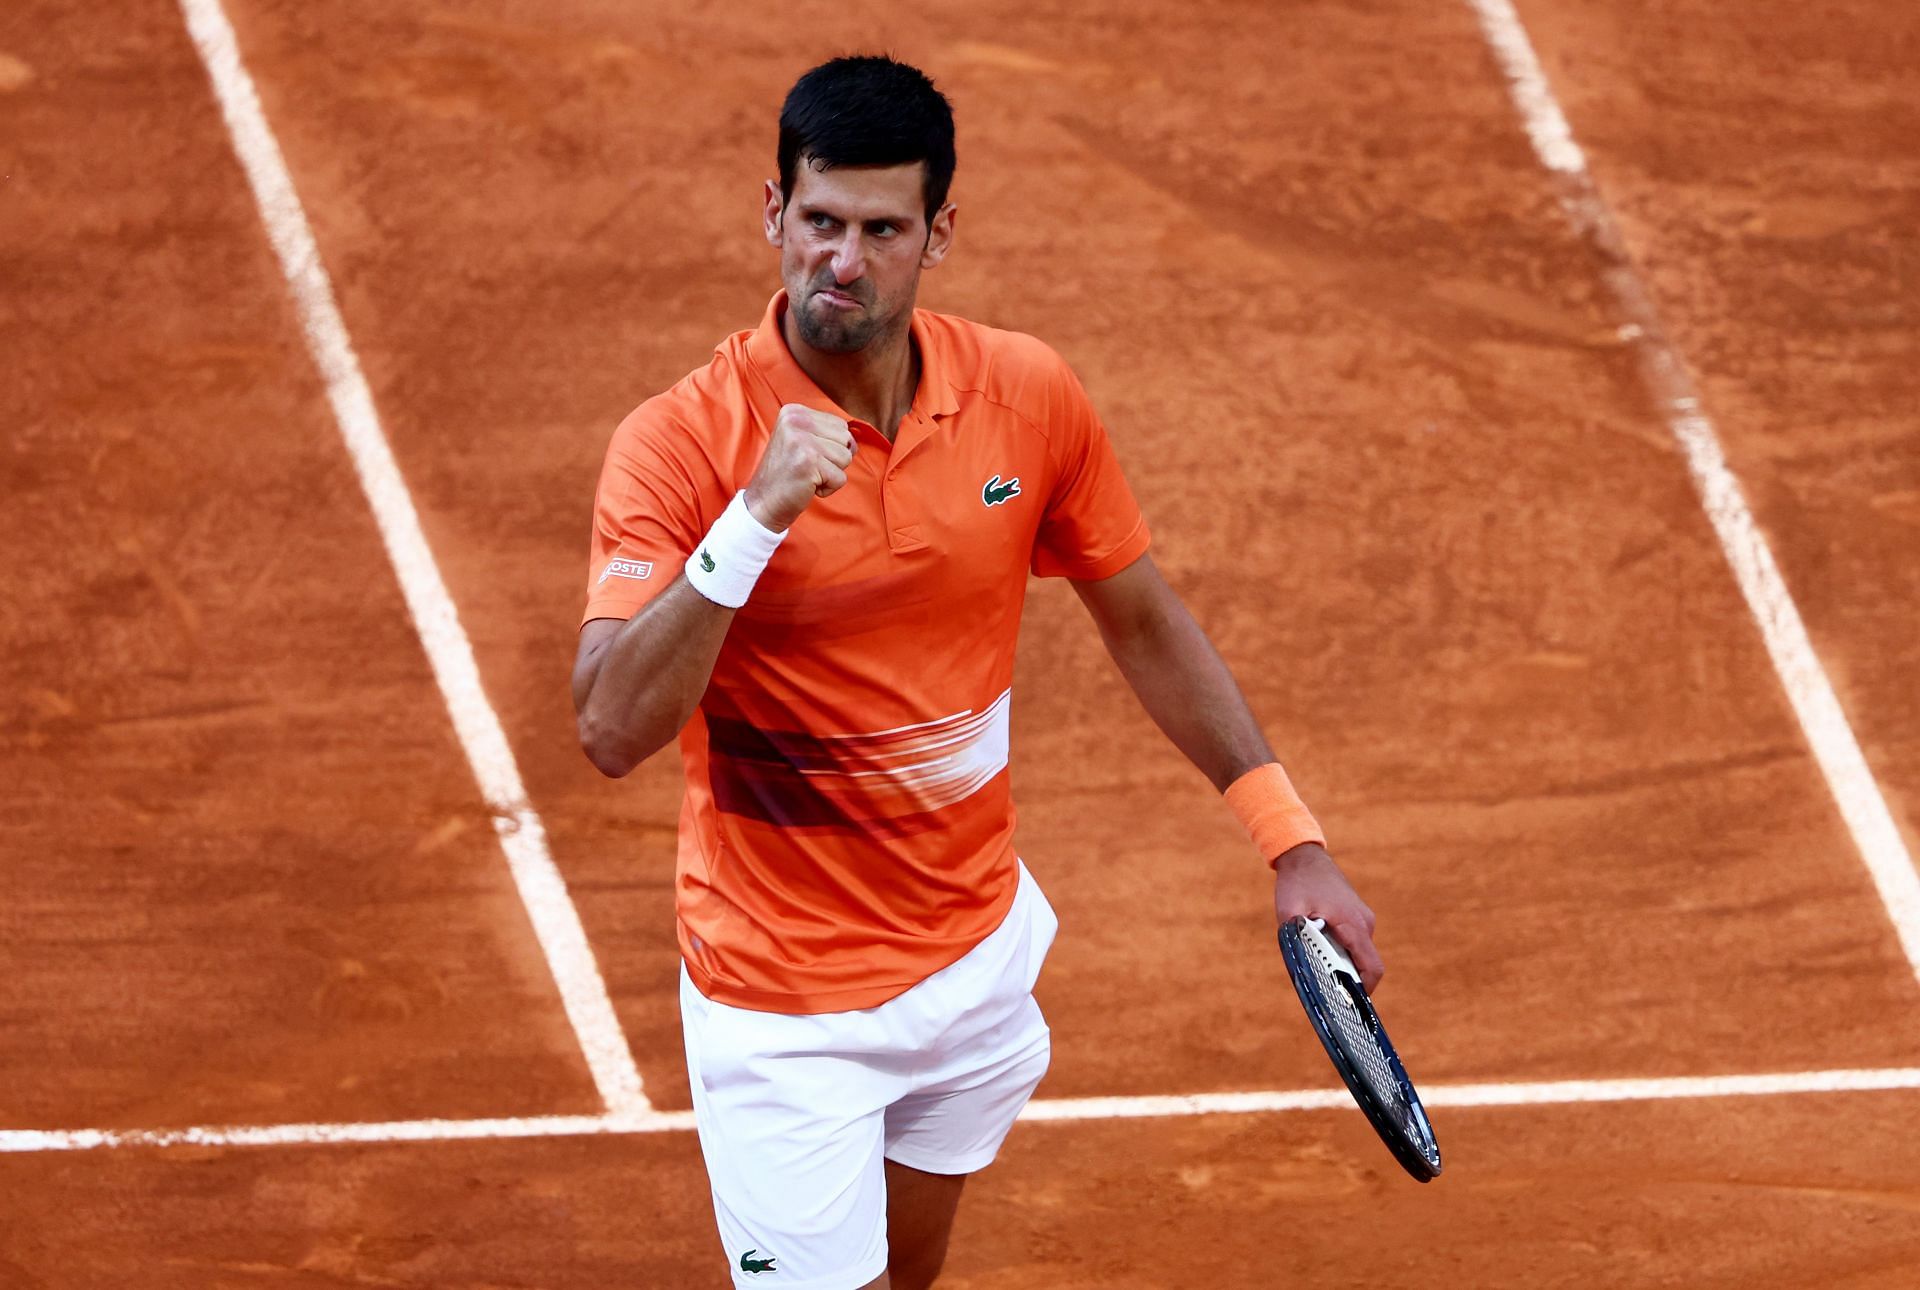 Novak Djokovic in action at the Madrid Open